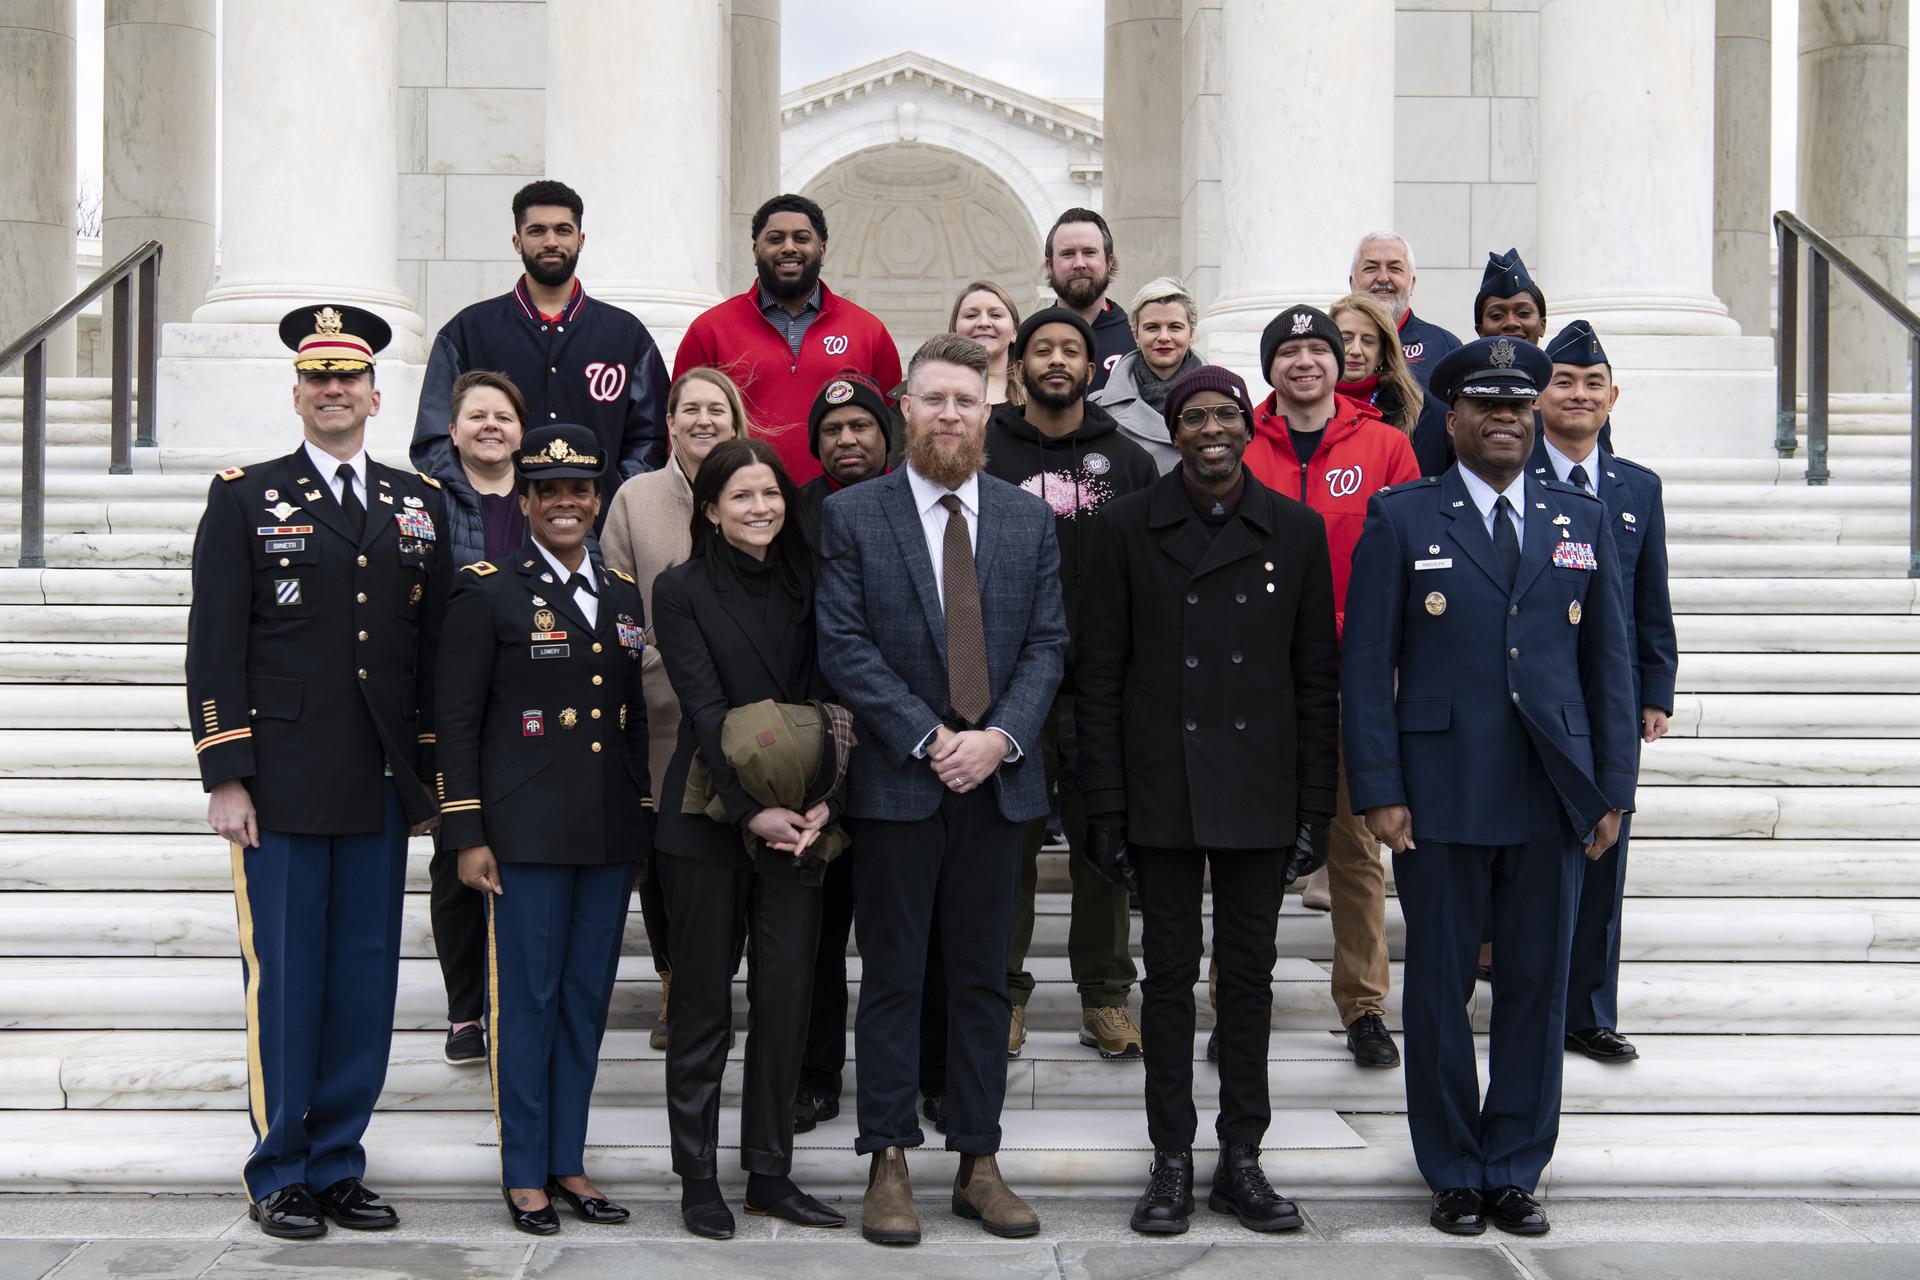 Sean Doolittle and members of the Nationals' front office at Arlington National Cemetery (Credit: Arlington National Cemetery)